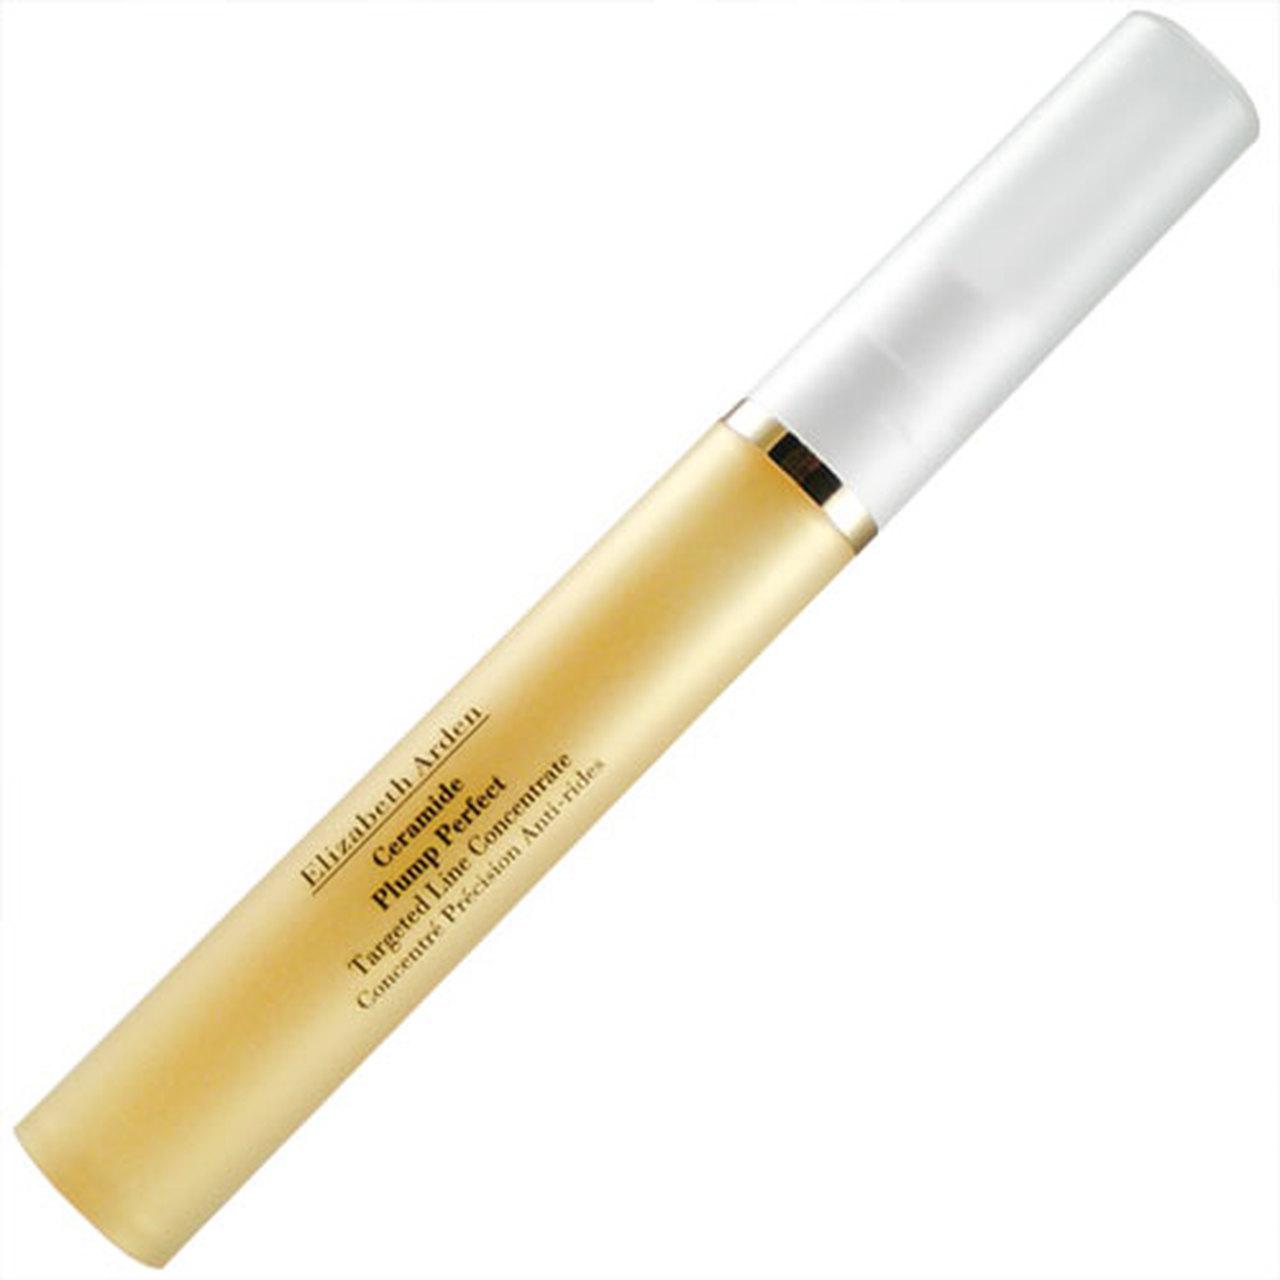 Ceramide Plump Perfect Targeted Line Concentrate